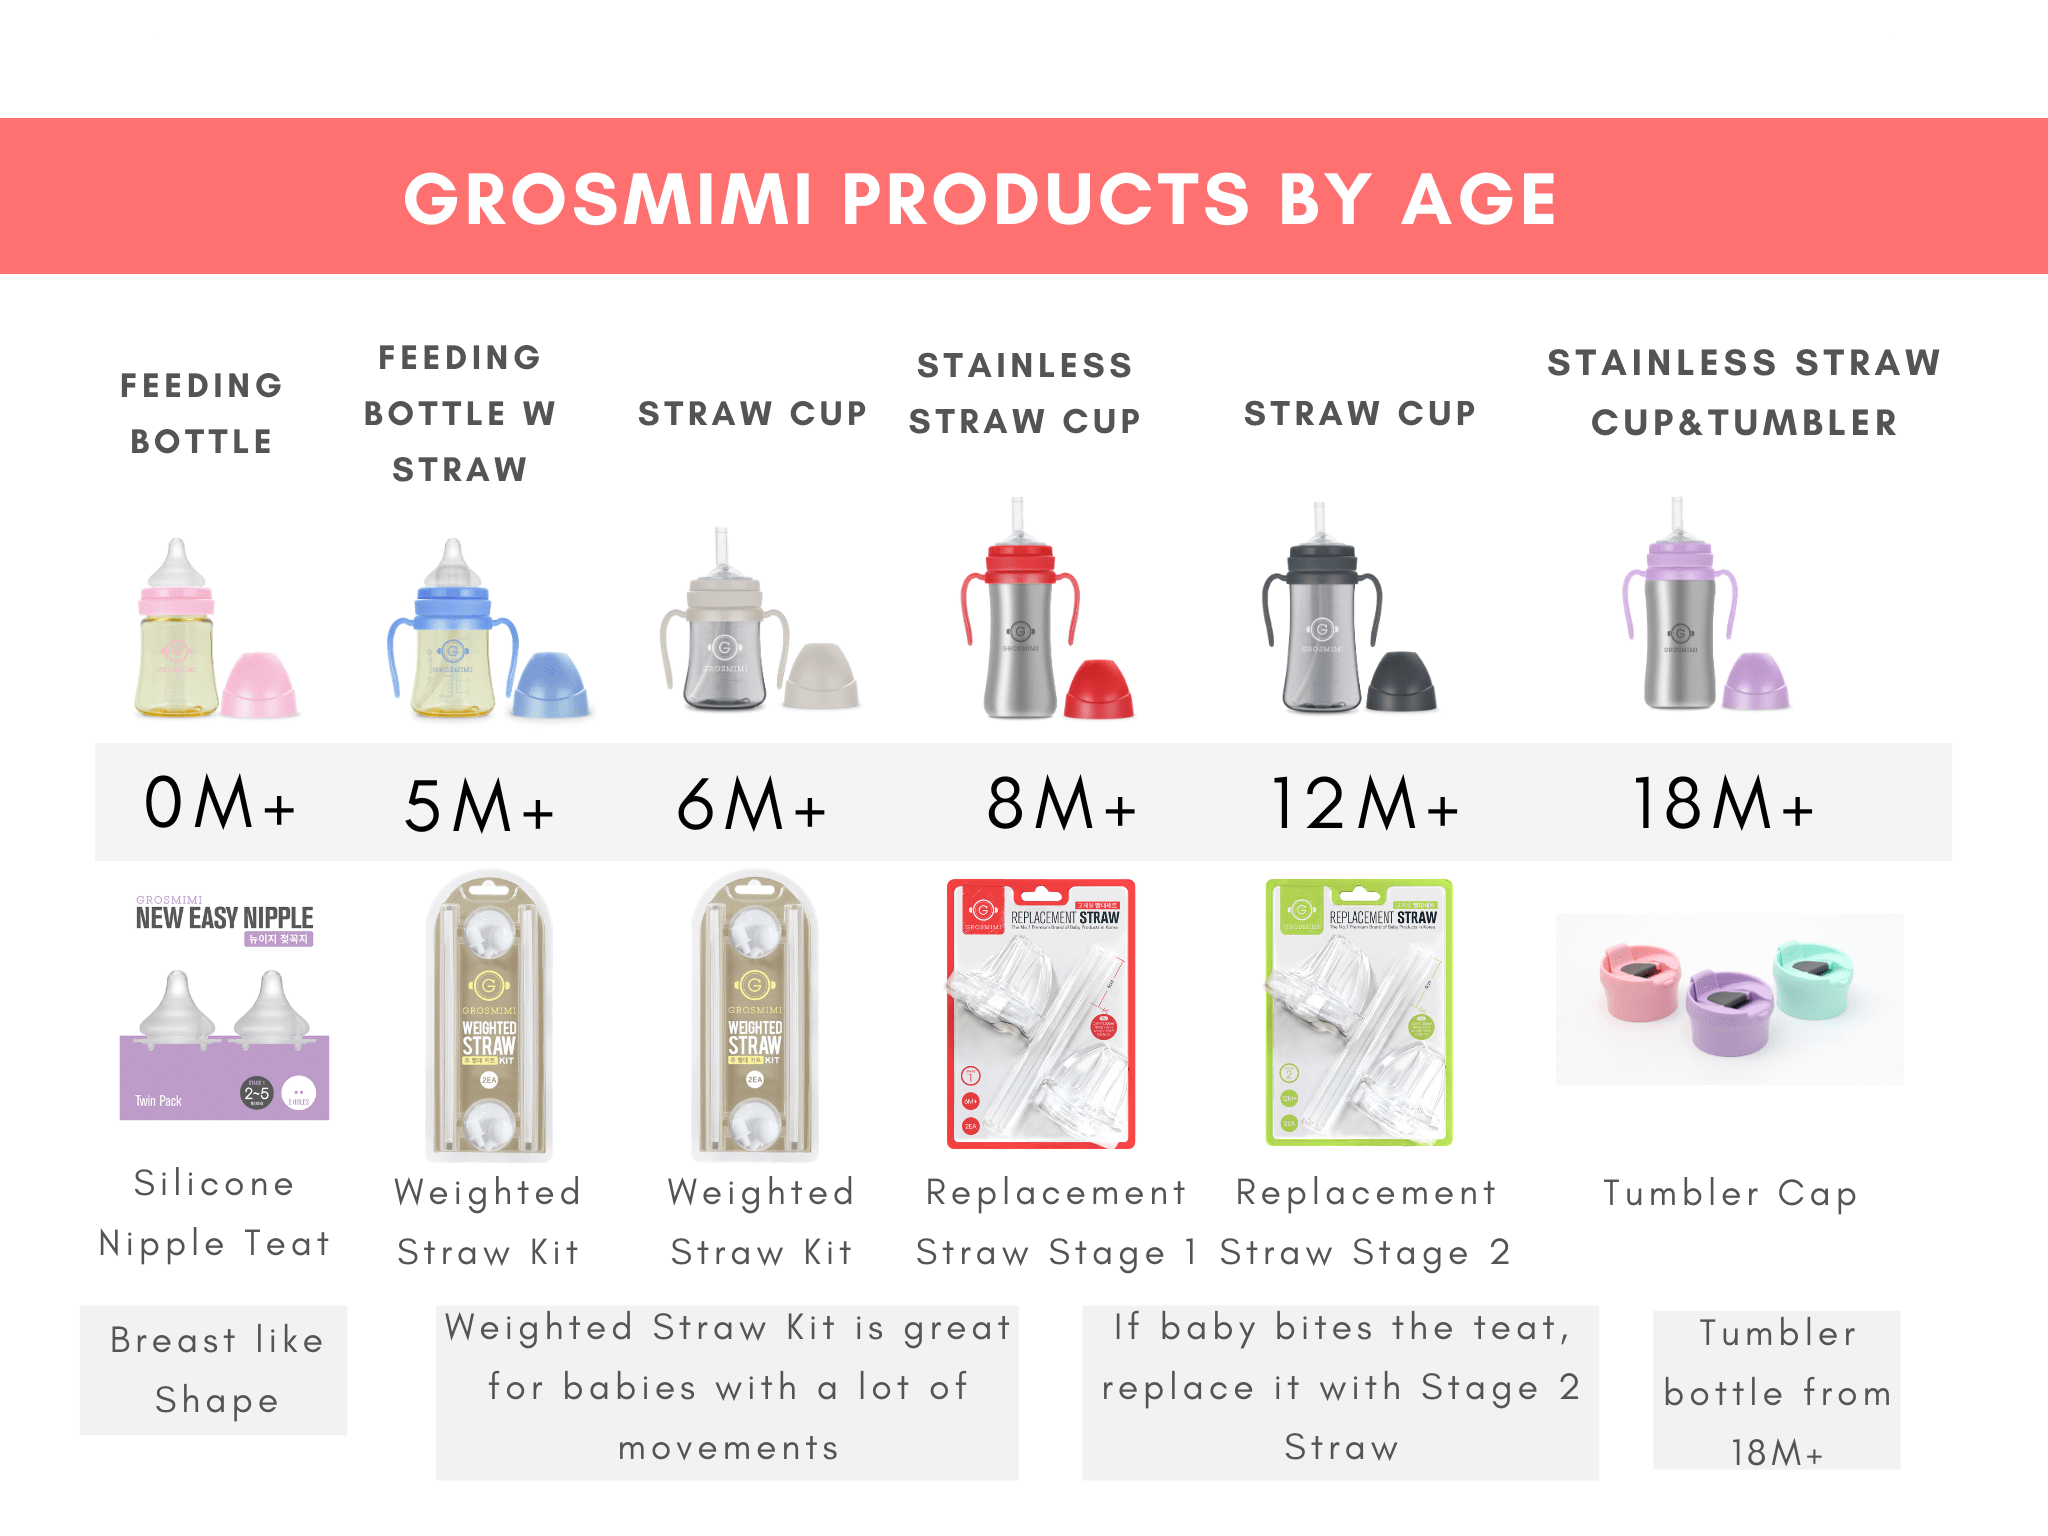 Grosmimi-Products-by-age-2.png (2048×1536)